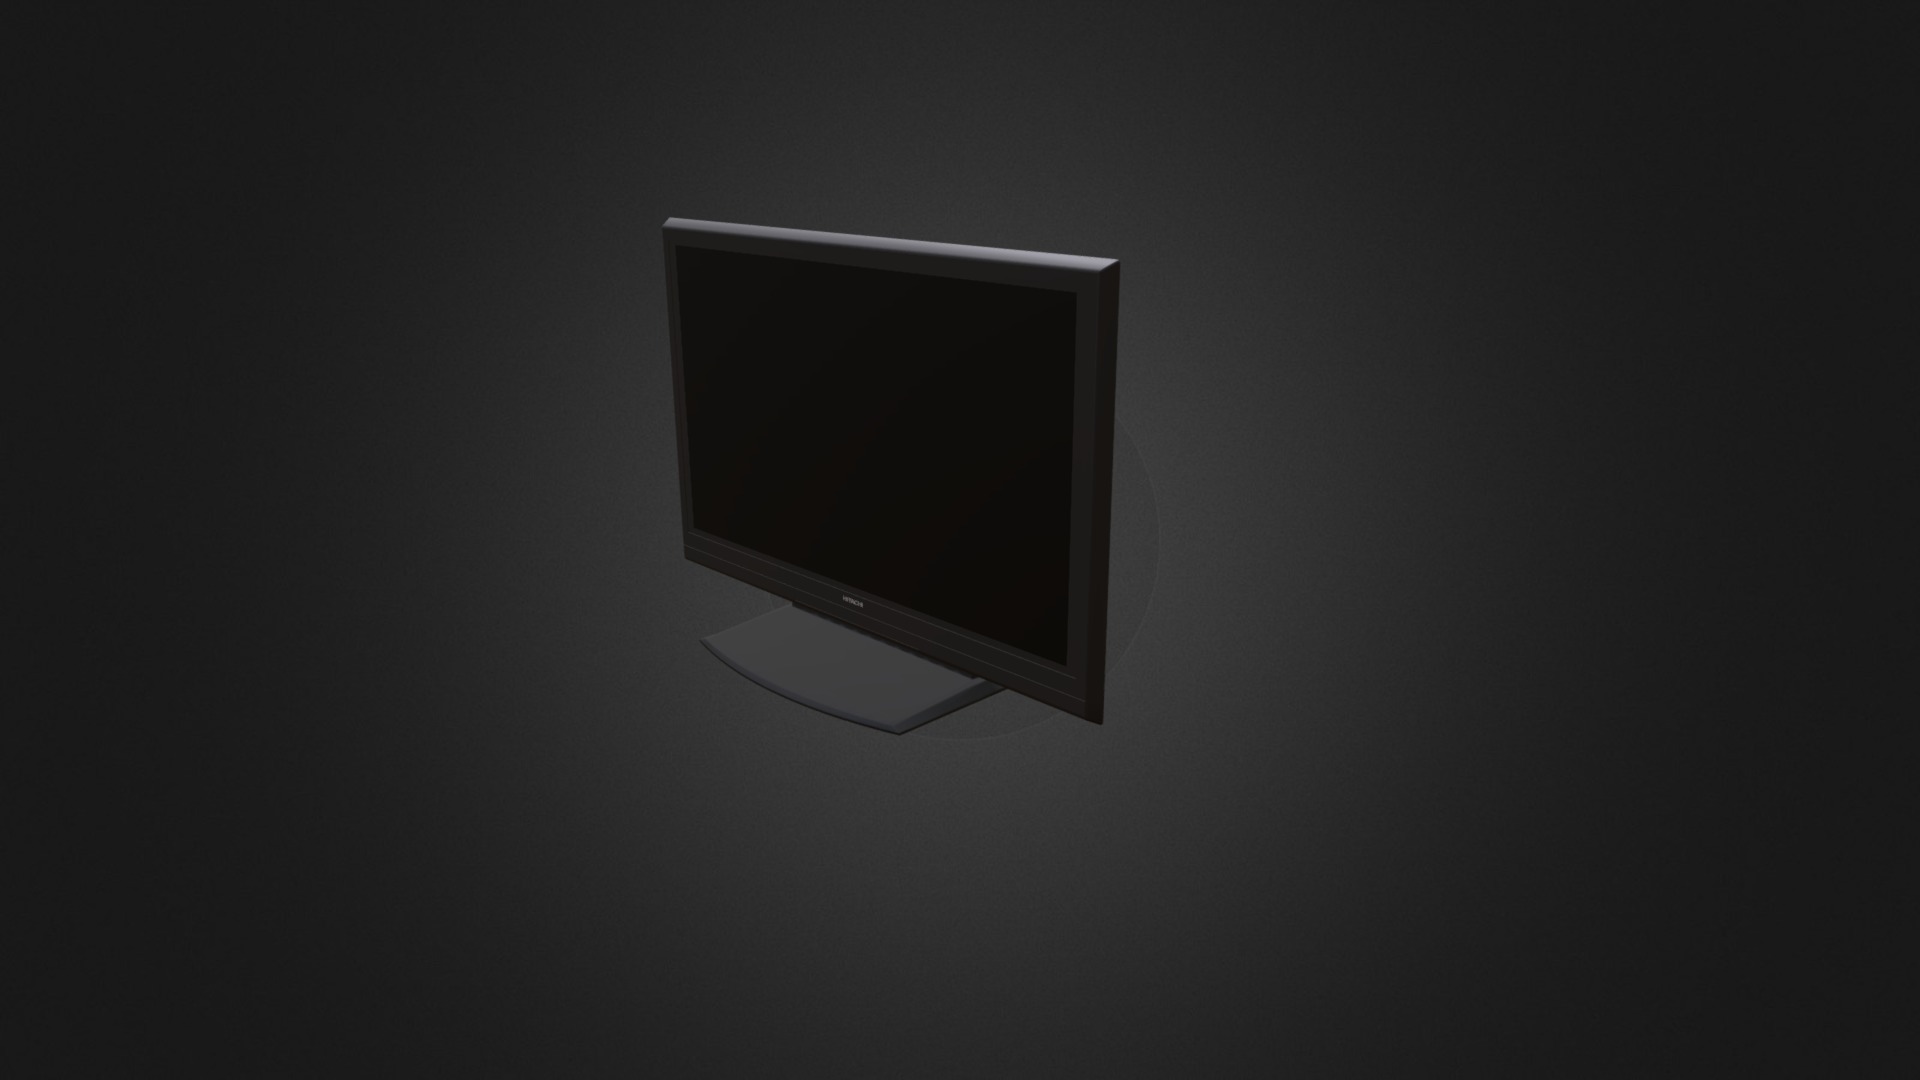 3D model appliance - This is a 3D model of the appliance. The 3D model is about a computer monitor with a blank screen.